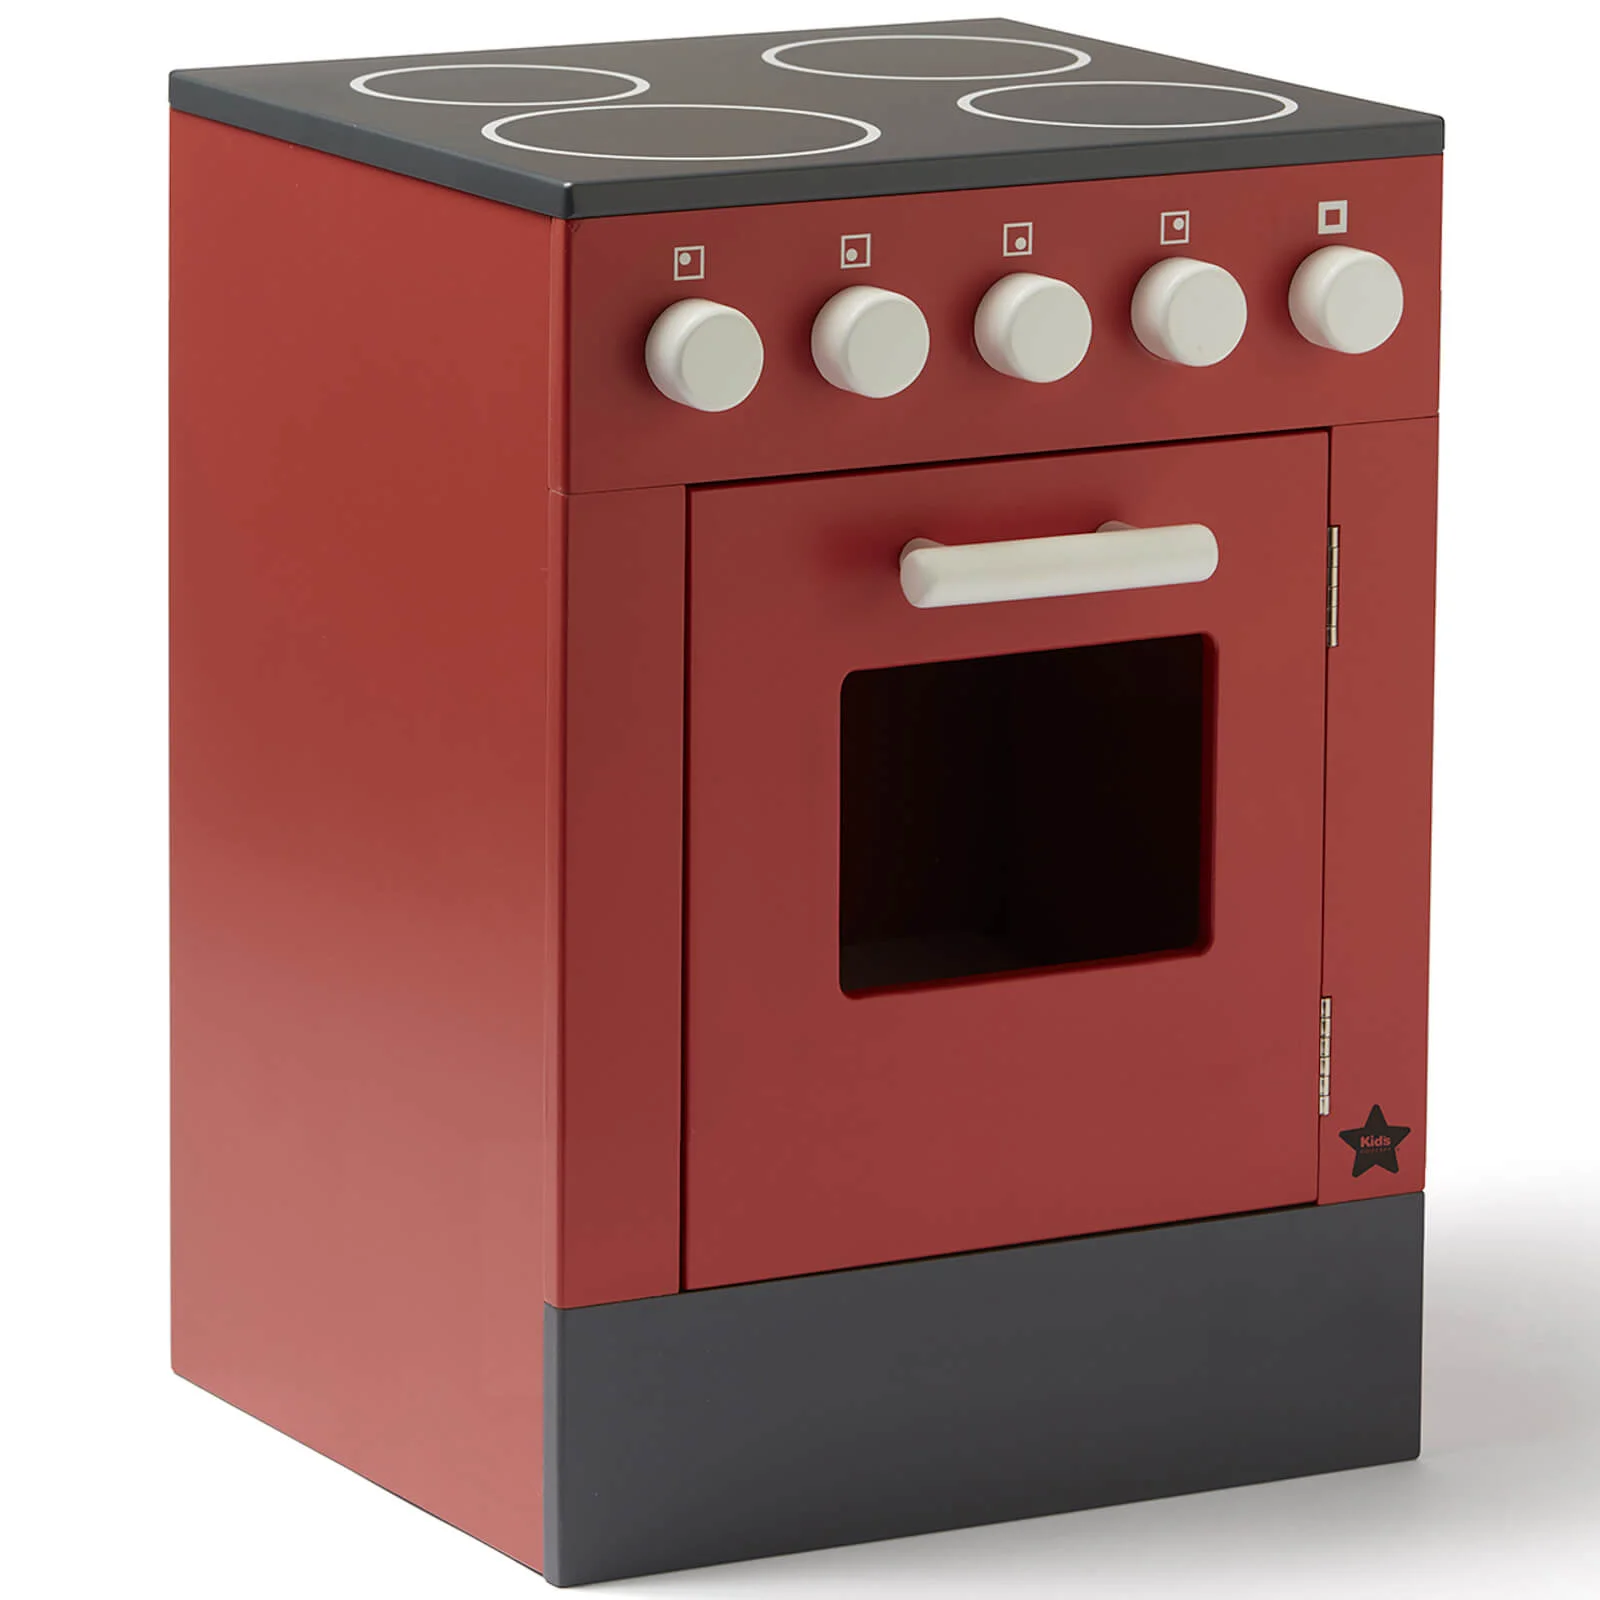 Kids Concept Stove - Red Image 1